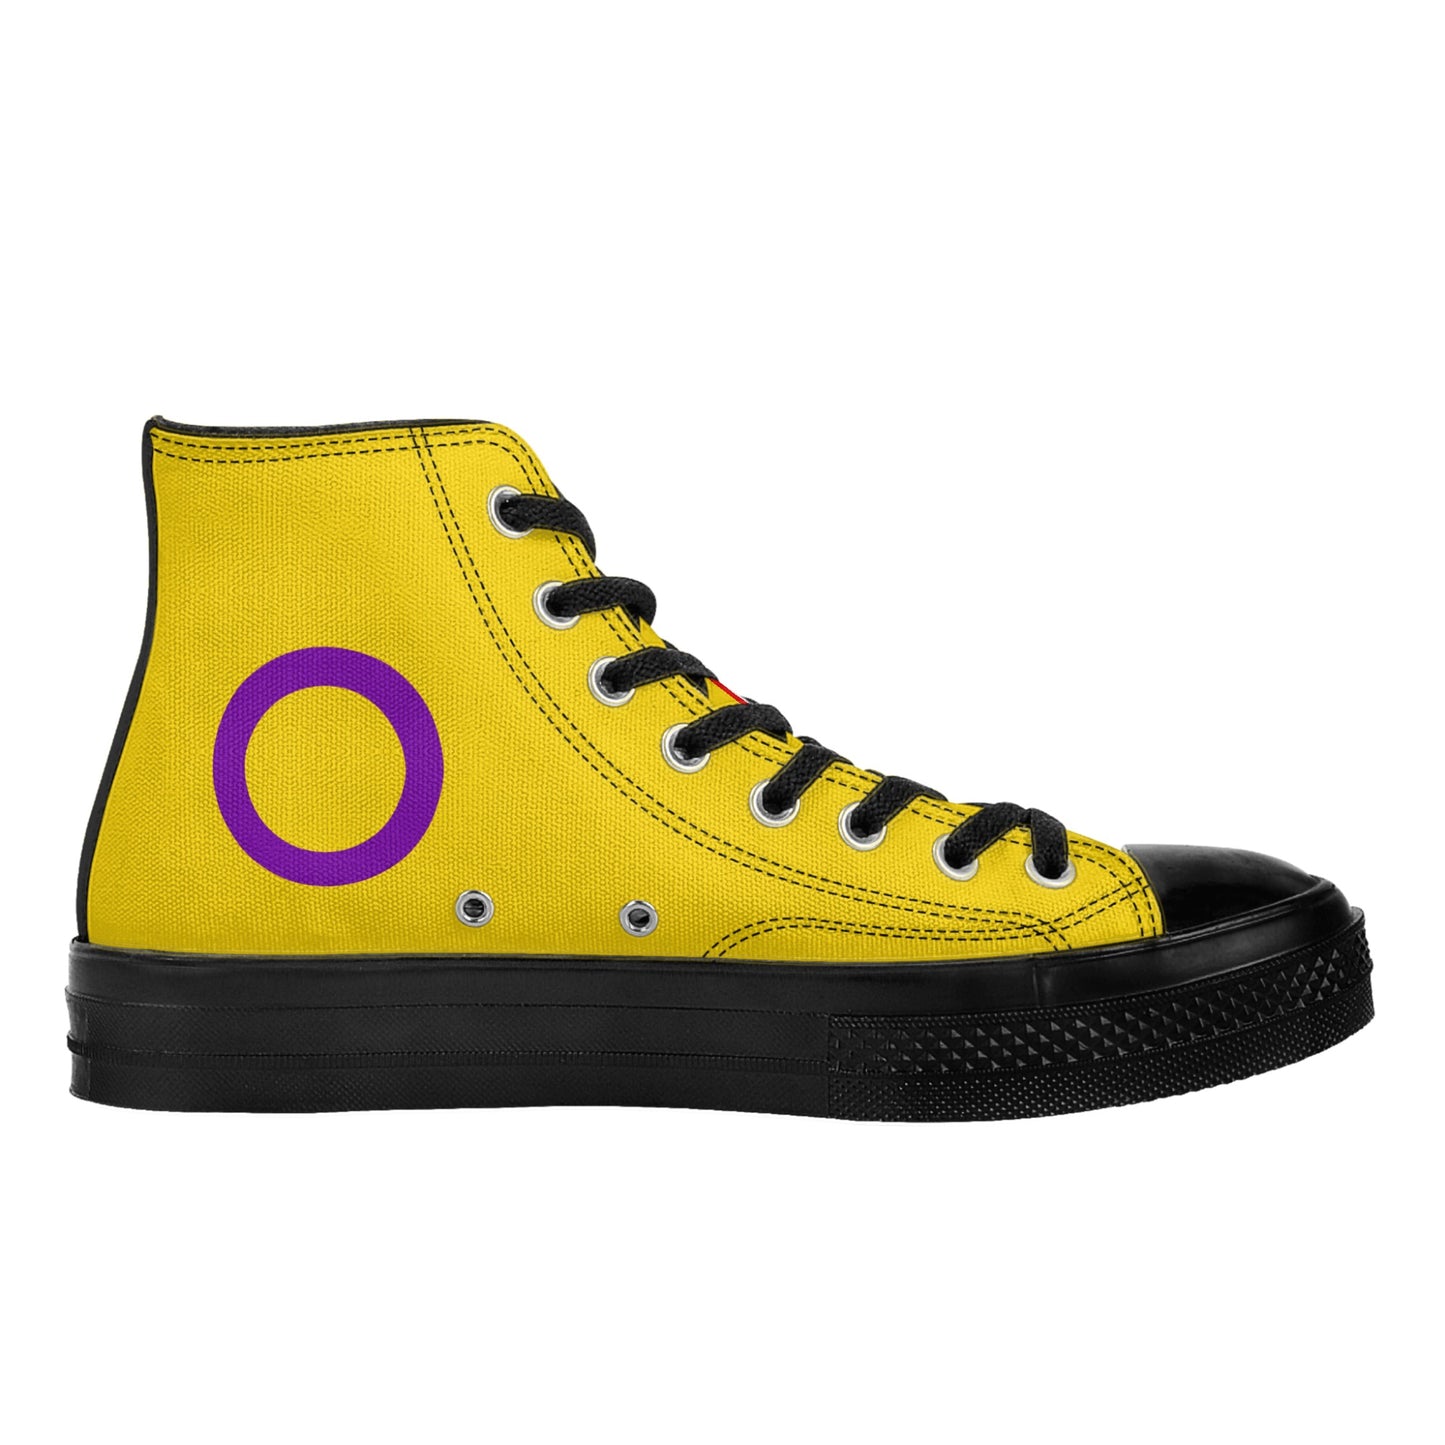 Intersex Pride Collection - Womens Classic Black High Top Canvas Shoes for the LGBTQIA+ community